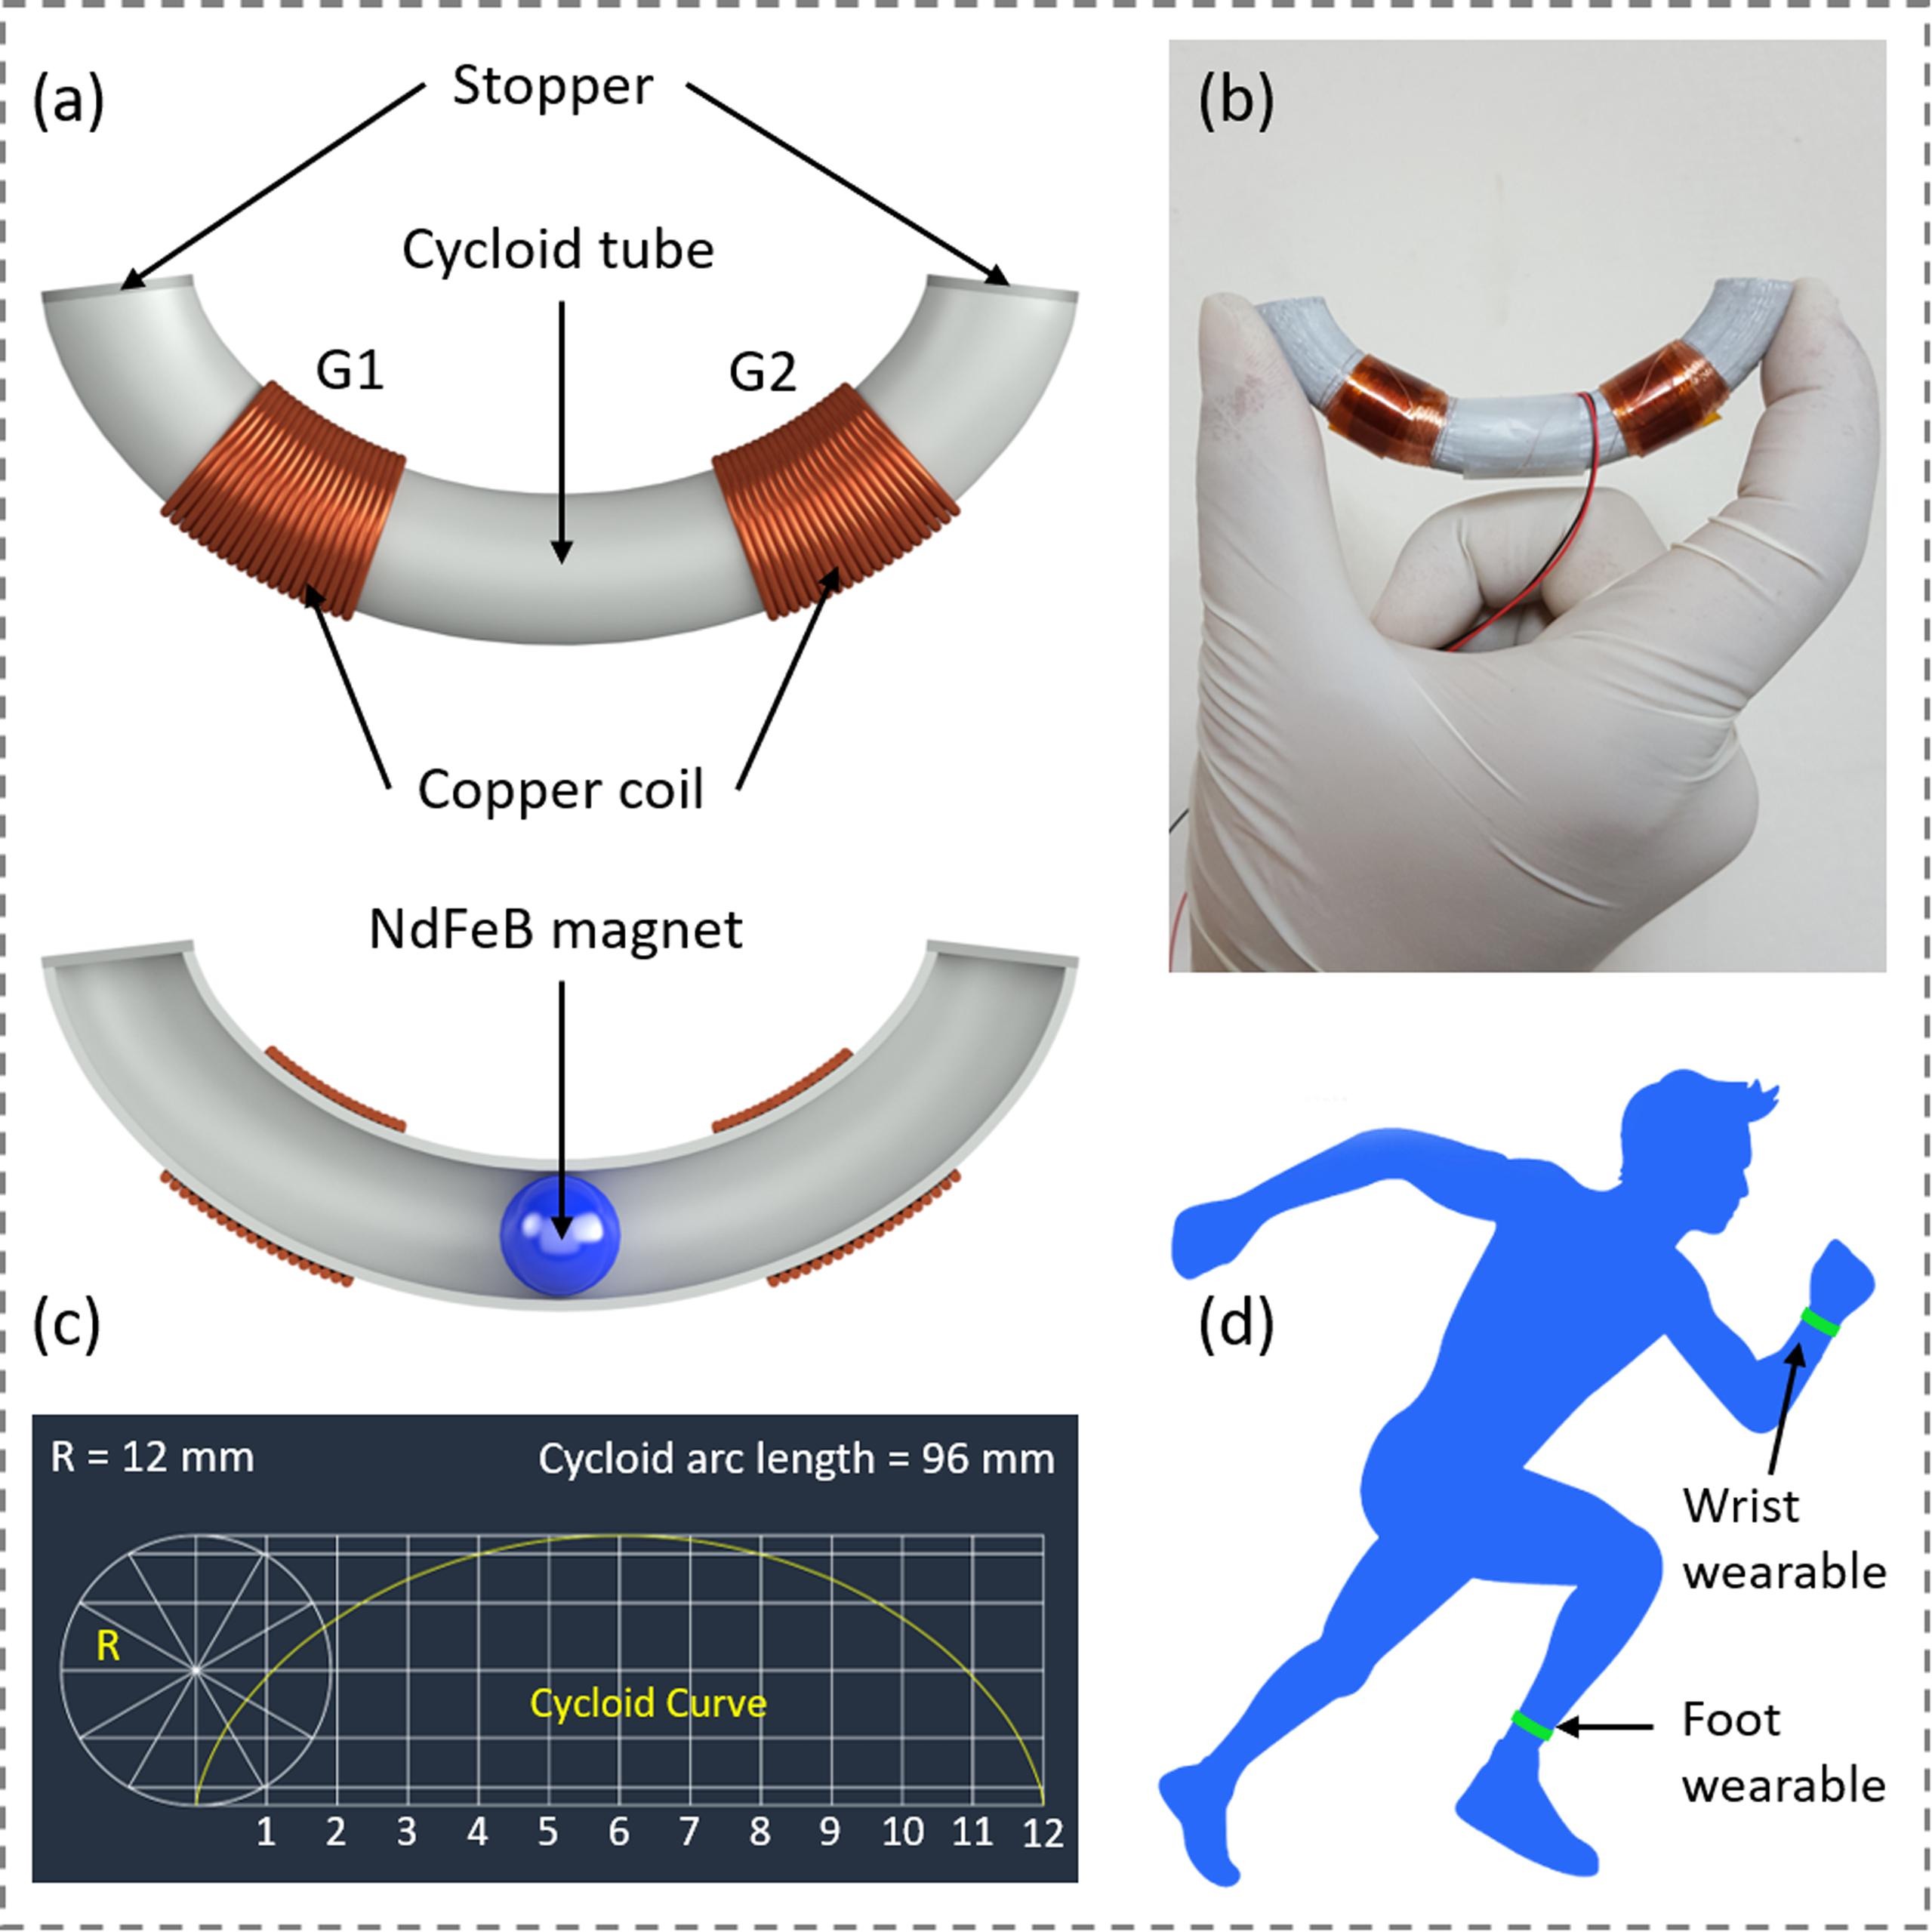 High-performance cycloid inspired wearable electromagnetic energy harvester for scavenging human motion energy